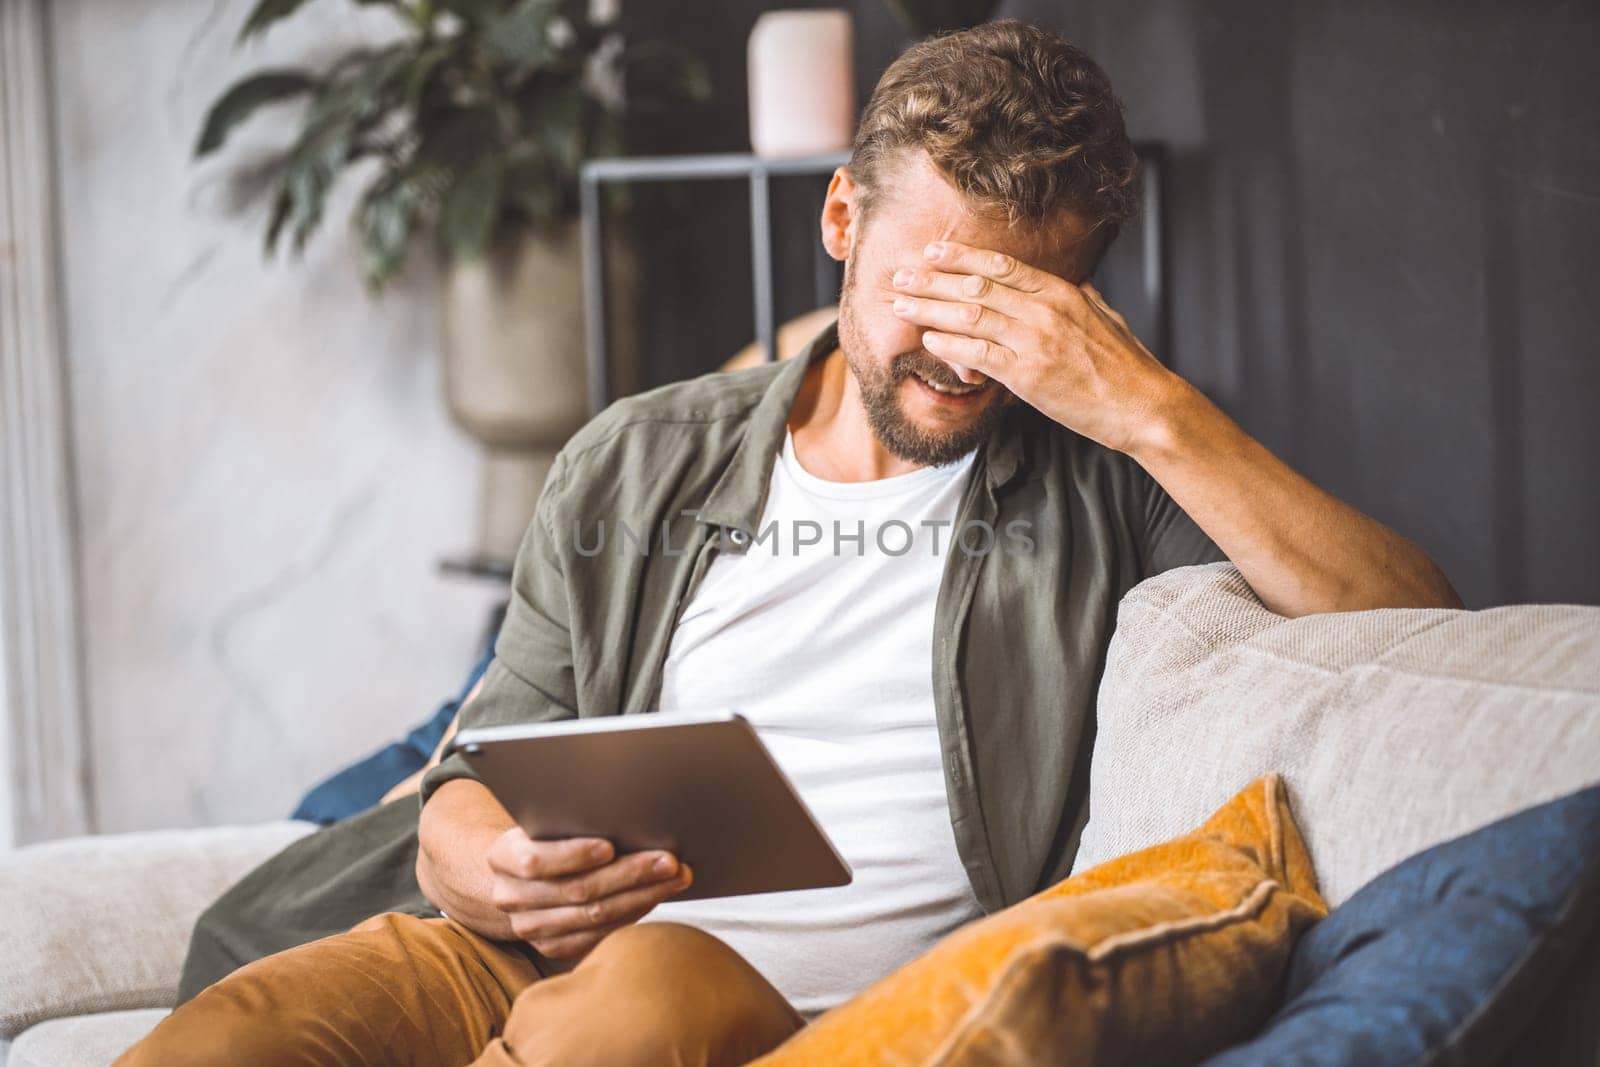 Sad man sitting on sofa home, holding tablet PC, making facepalm gesture. Frustration and disappointment on face palpable, as if something has gone wrong with technology or communication through internet. by LipikStockMedia